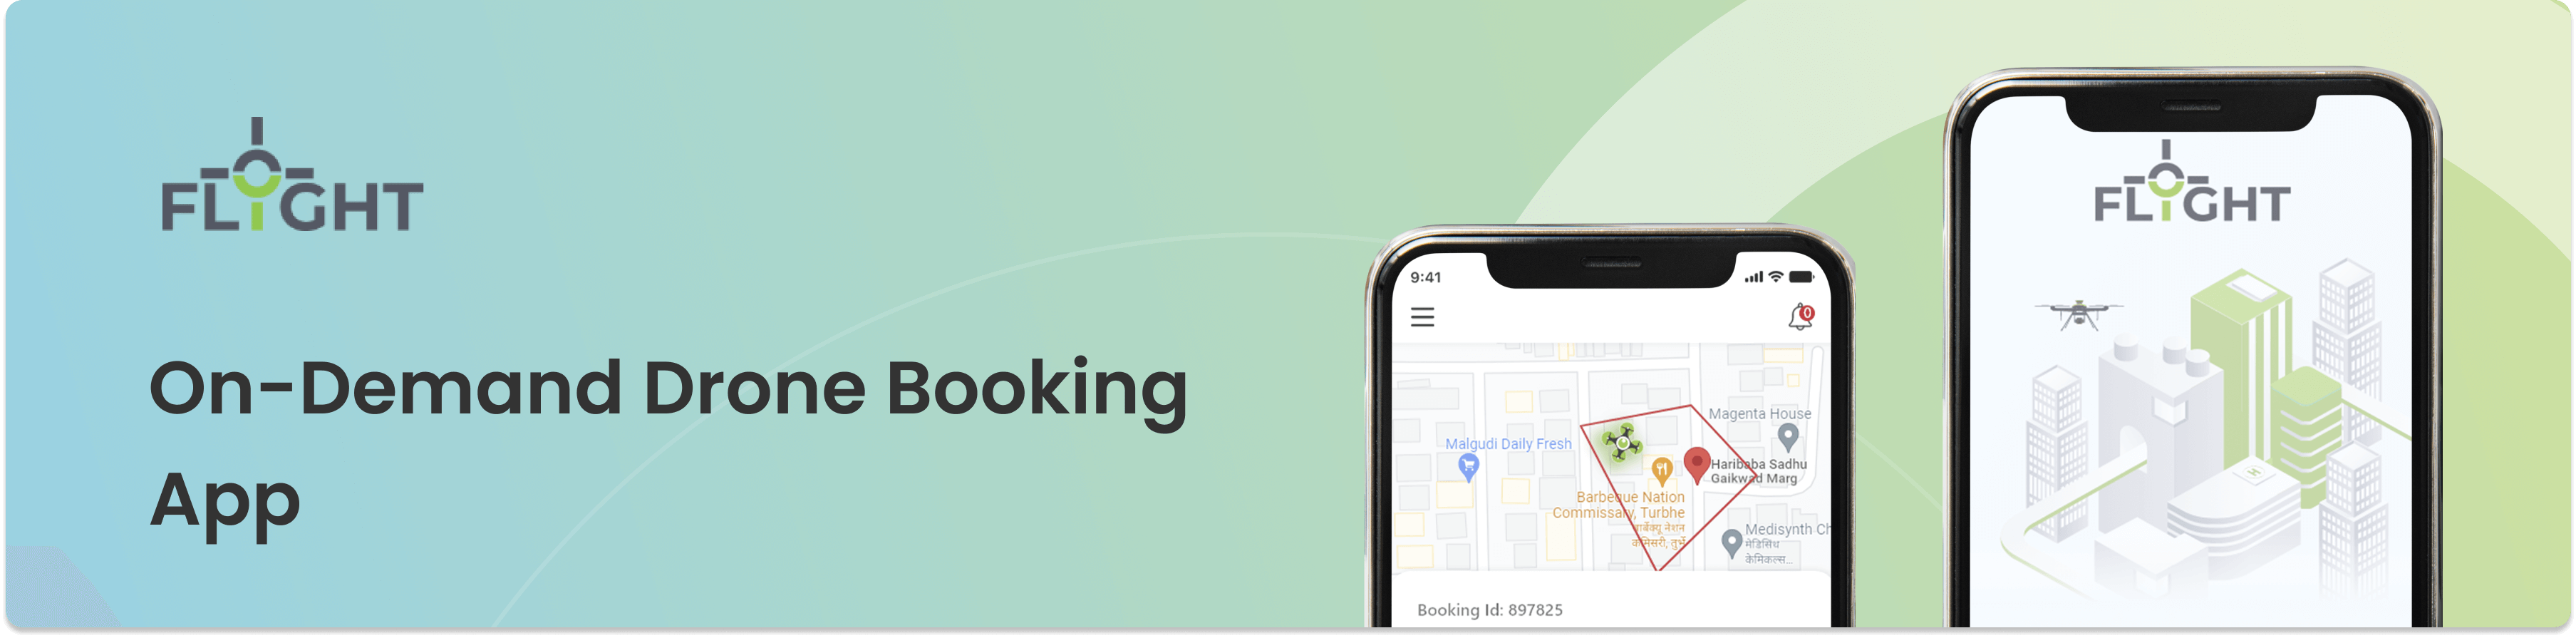 On-demand Drone Booking app